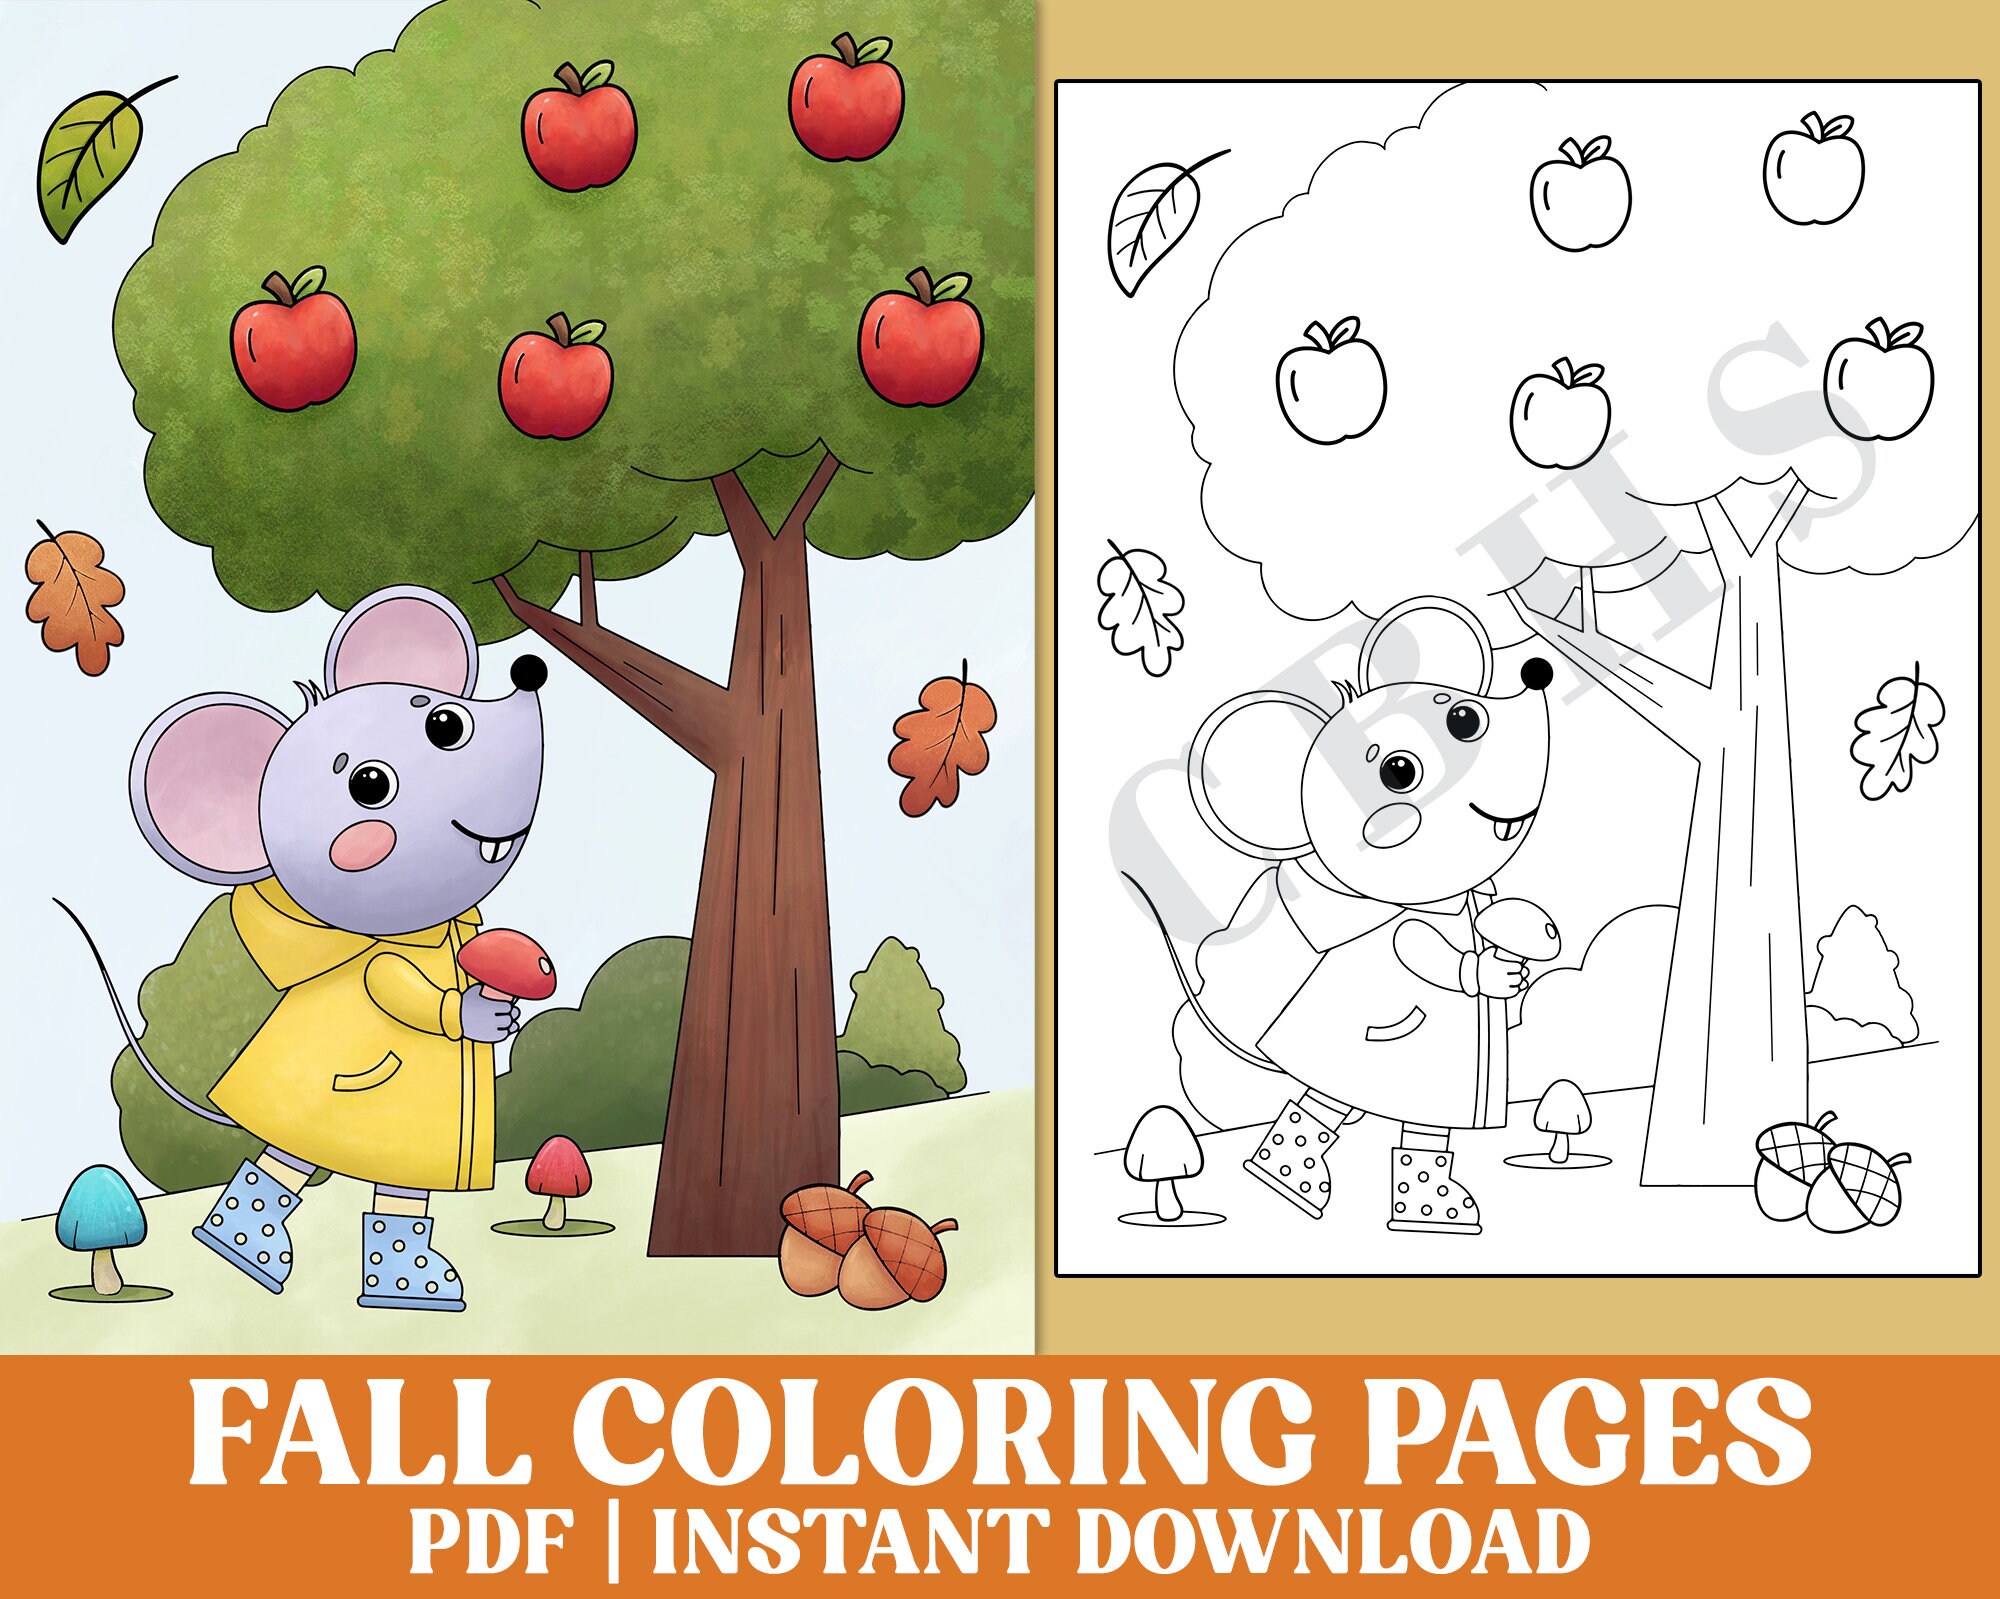 Fall coloring pages for kids printable v kids coloring pages pdf file download cute autumn coloring page kids coloring book pages